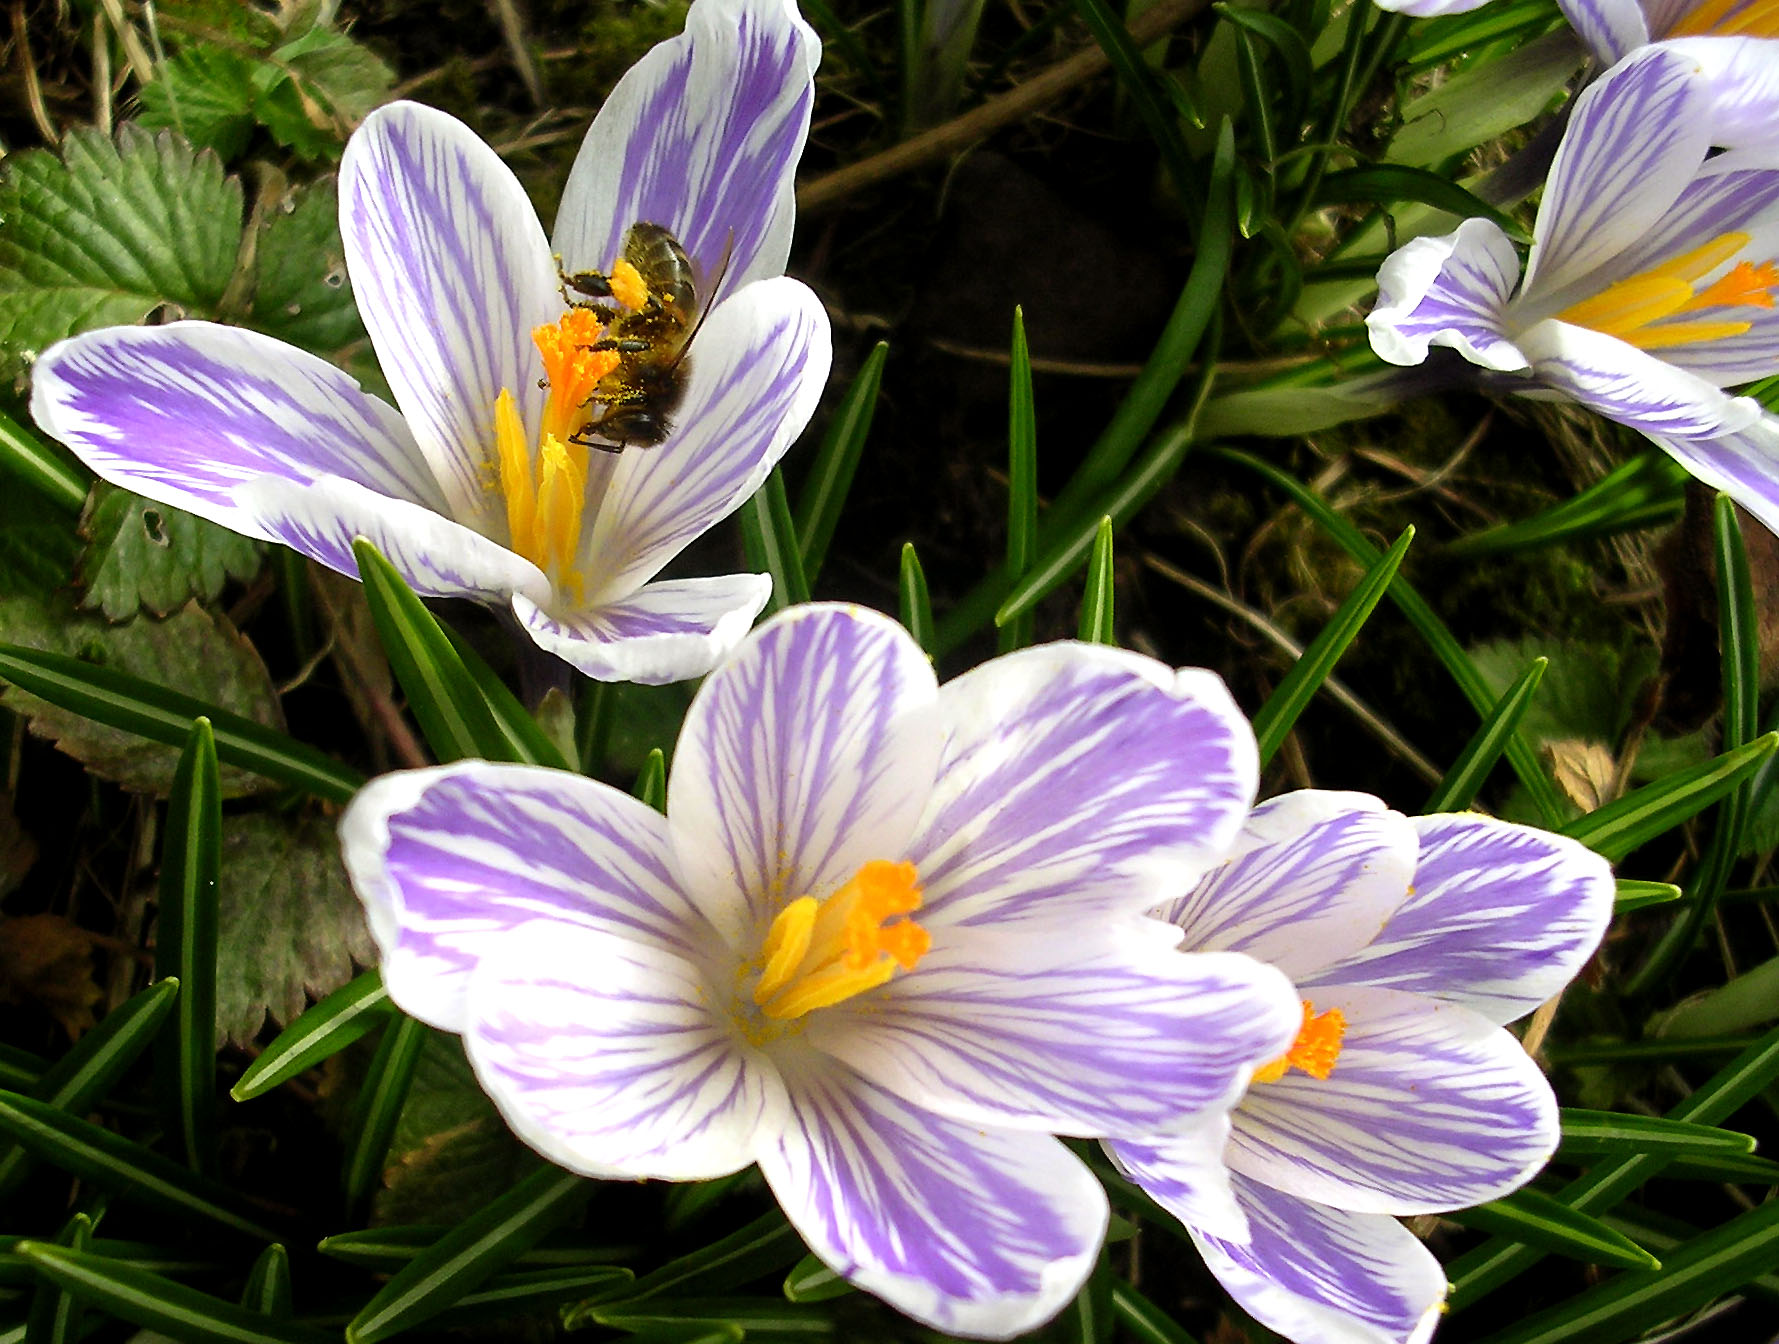 Early spring blooms for attracting bees